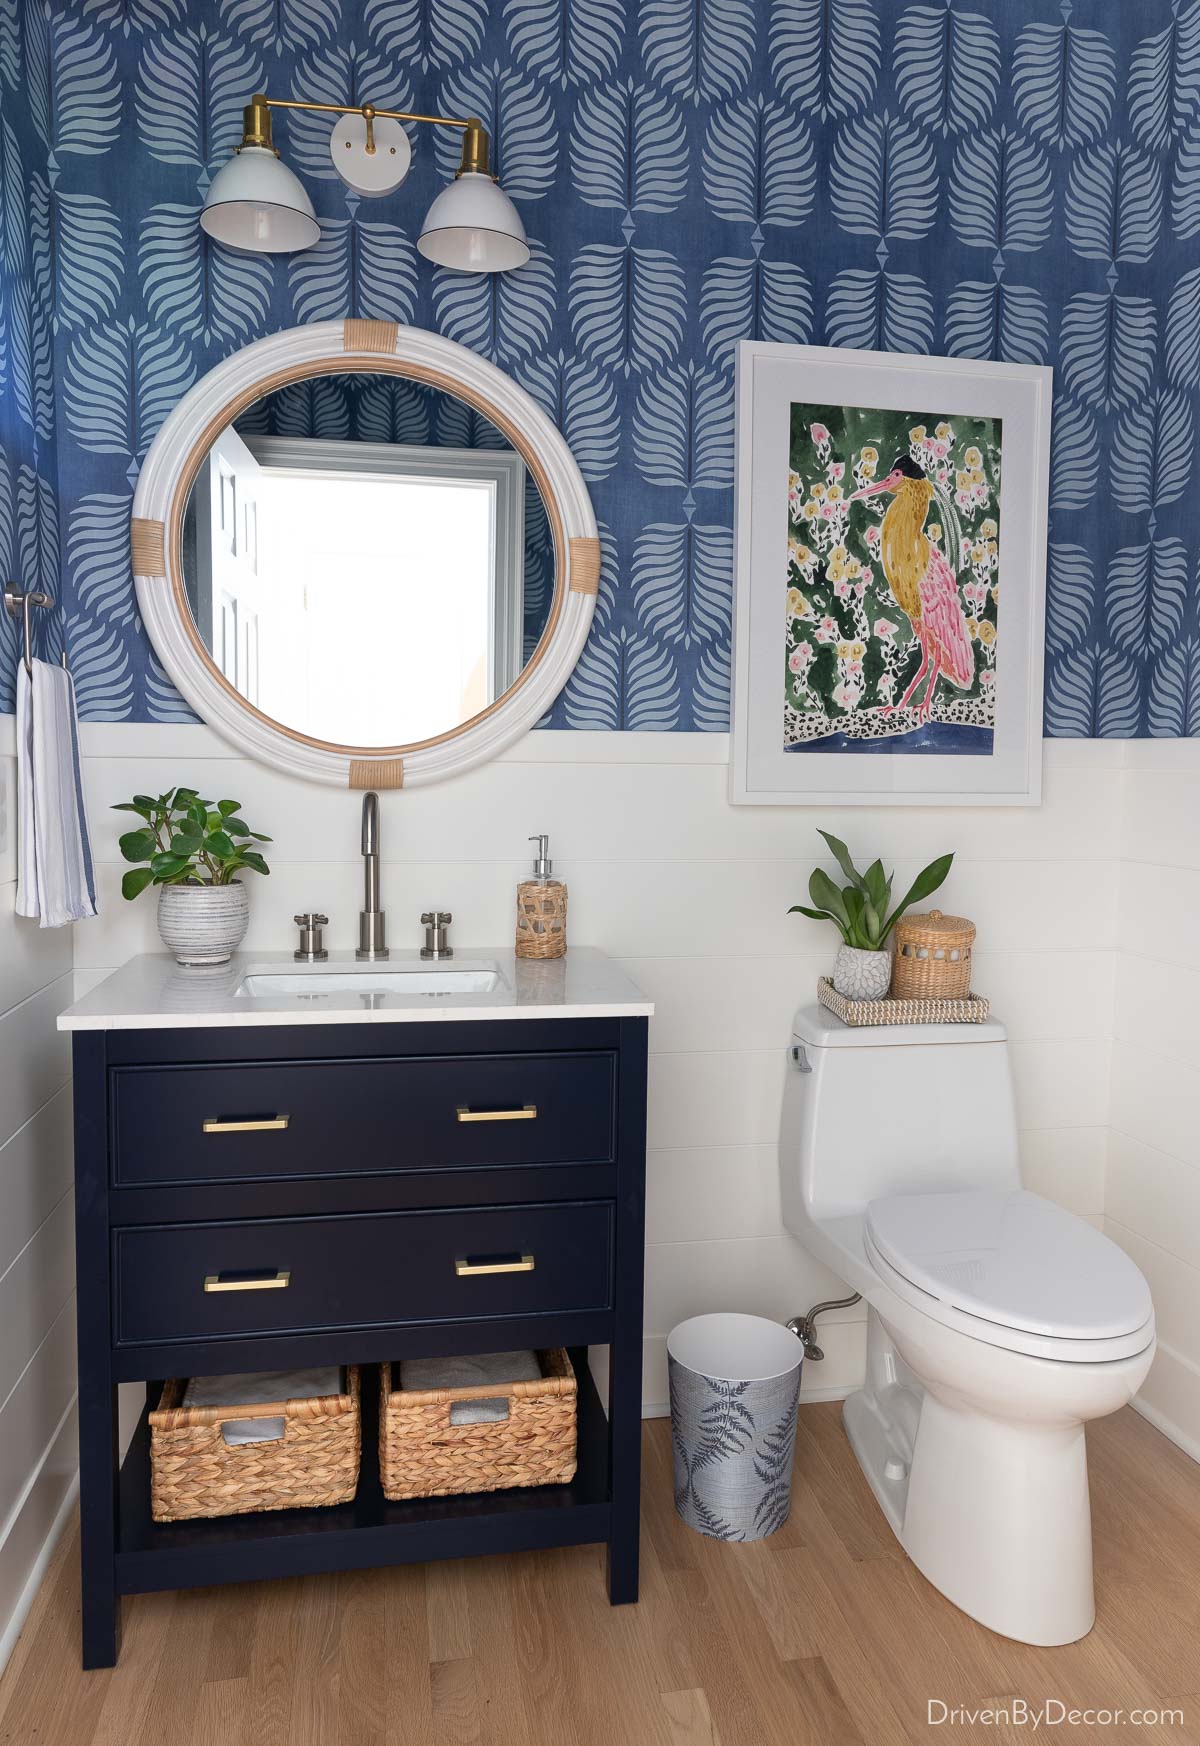 Bathroom with shiplap walls, wallpaper, small vanity, and round mirror